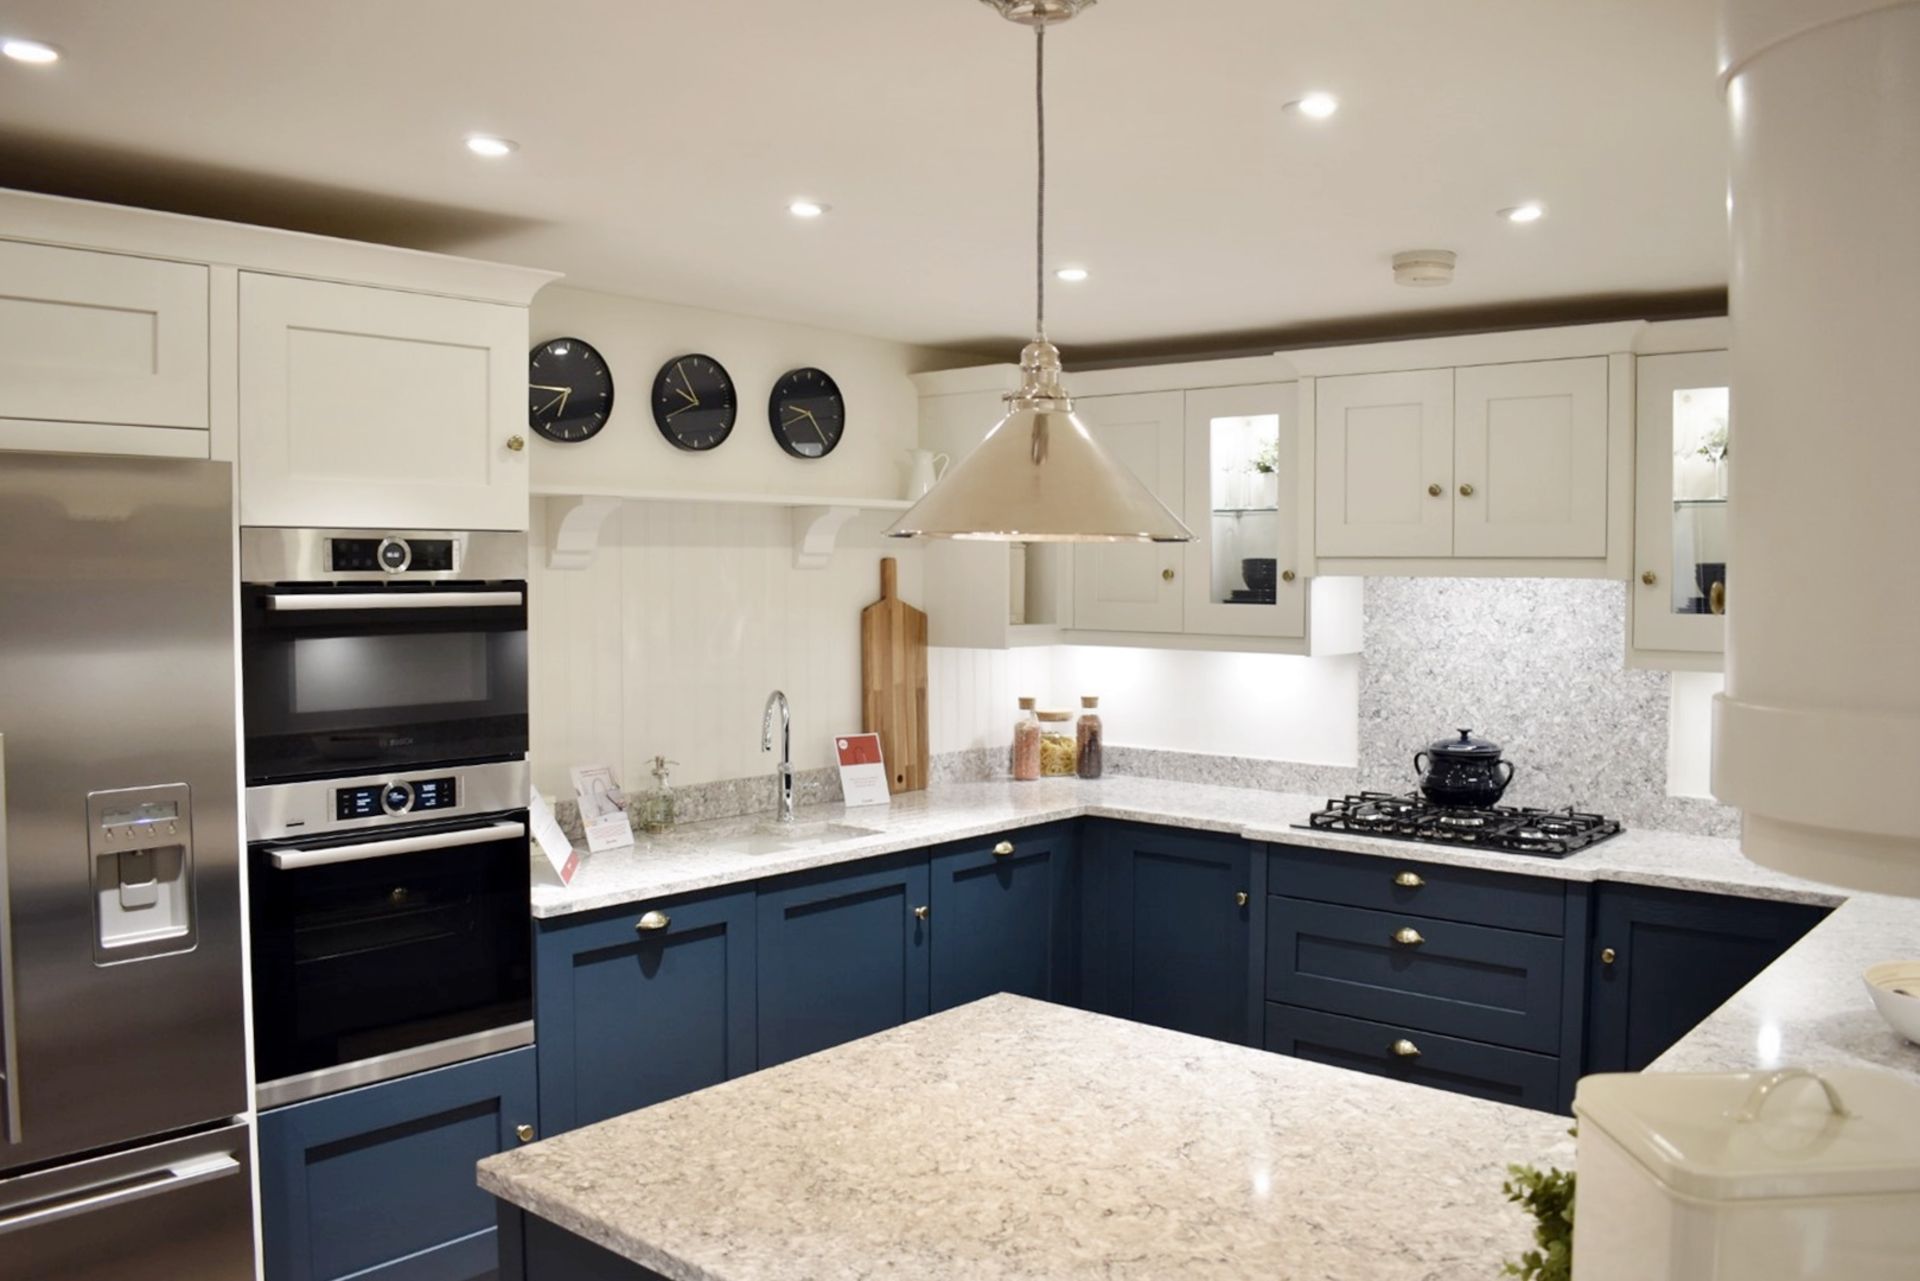 1 x 'Mornington' Shaker-style Feature-rich Fitted Kitchen in Blue, with Premium Branded Appliances - Image 2 of 67